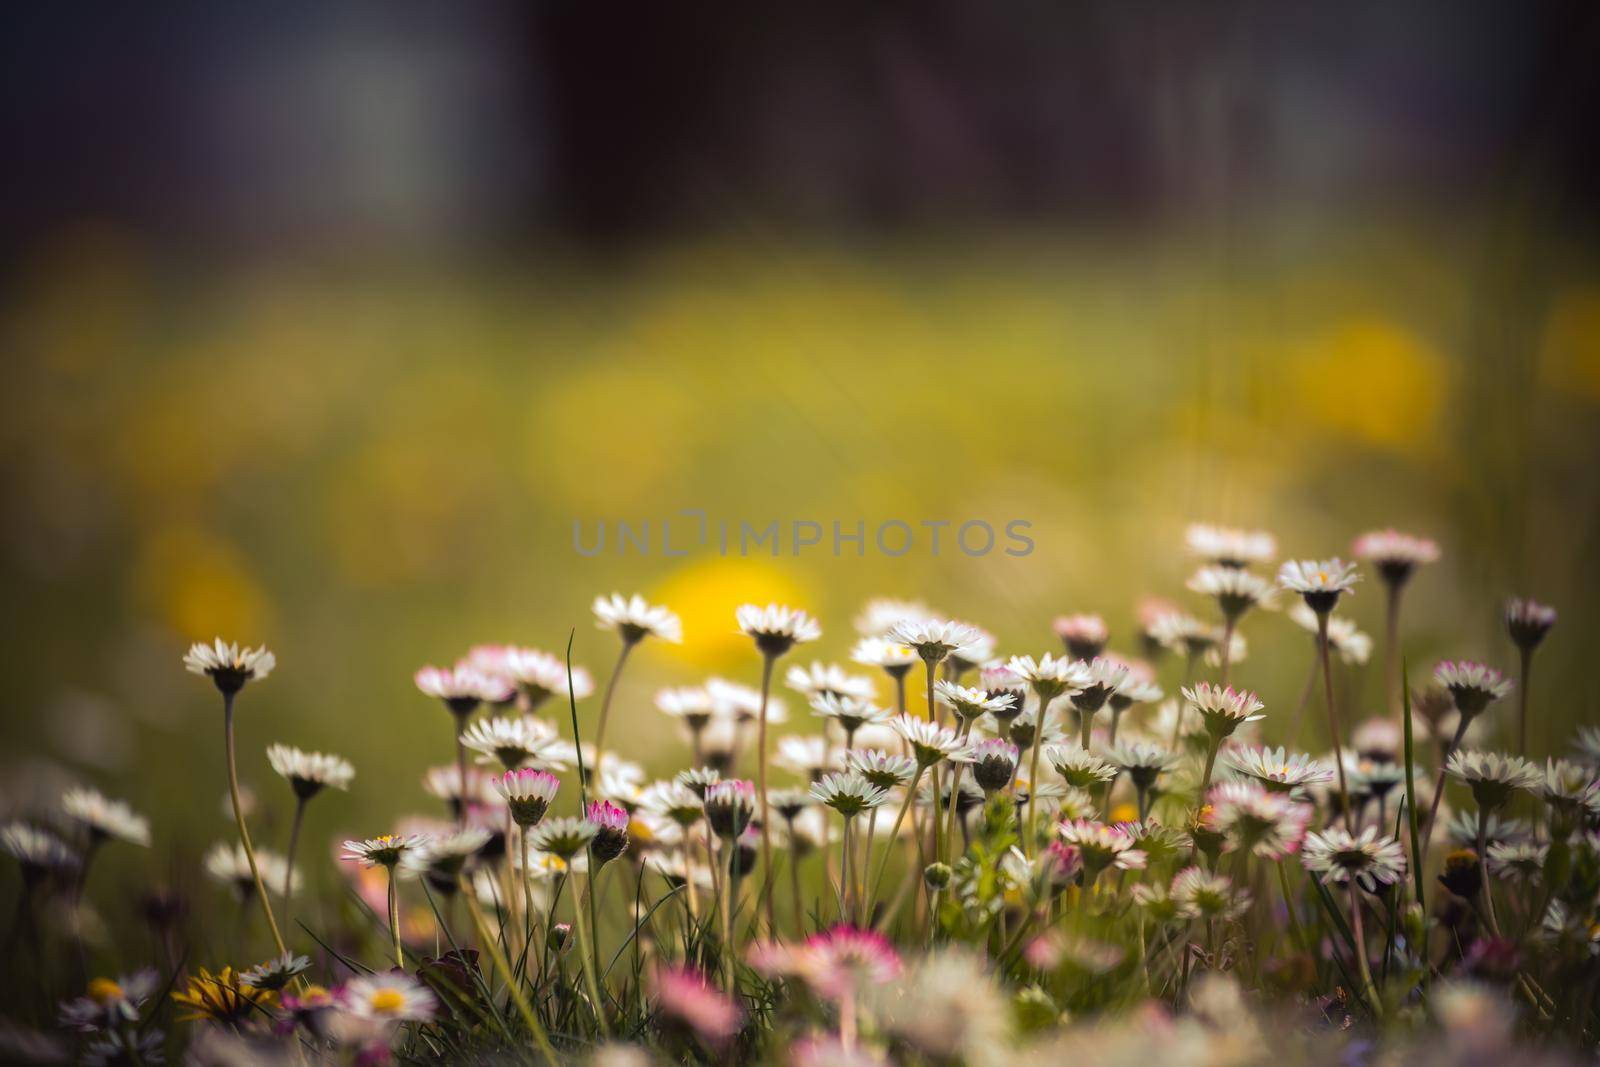 Daisies in springtime: Close up picture, copy space by Daxenbichler